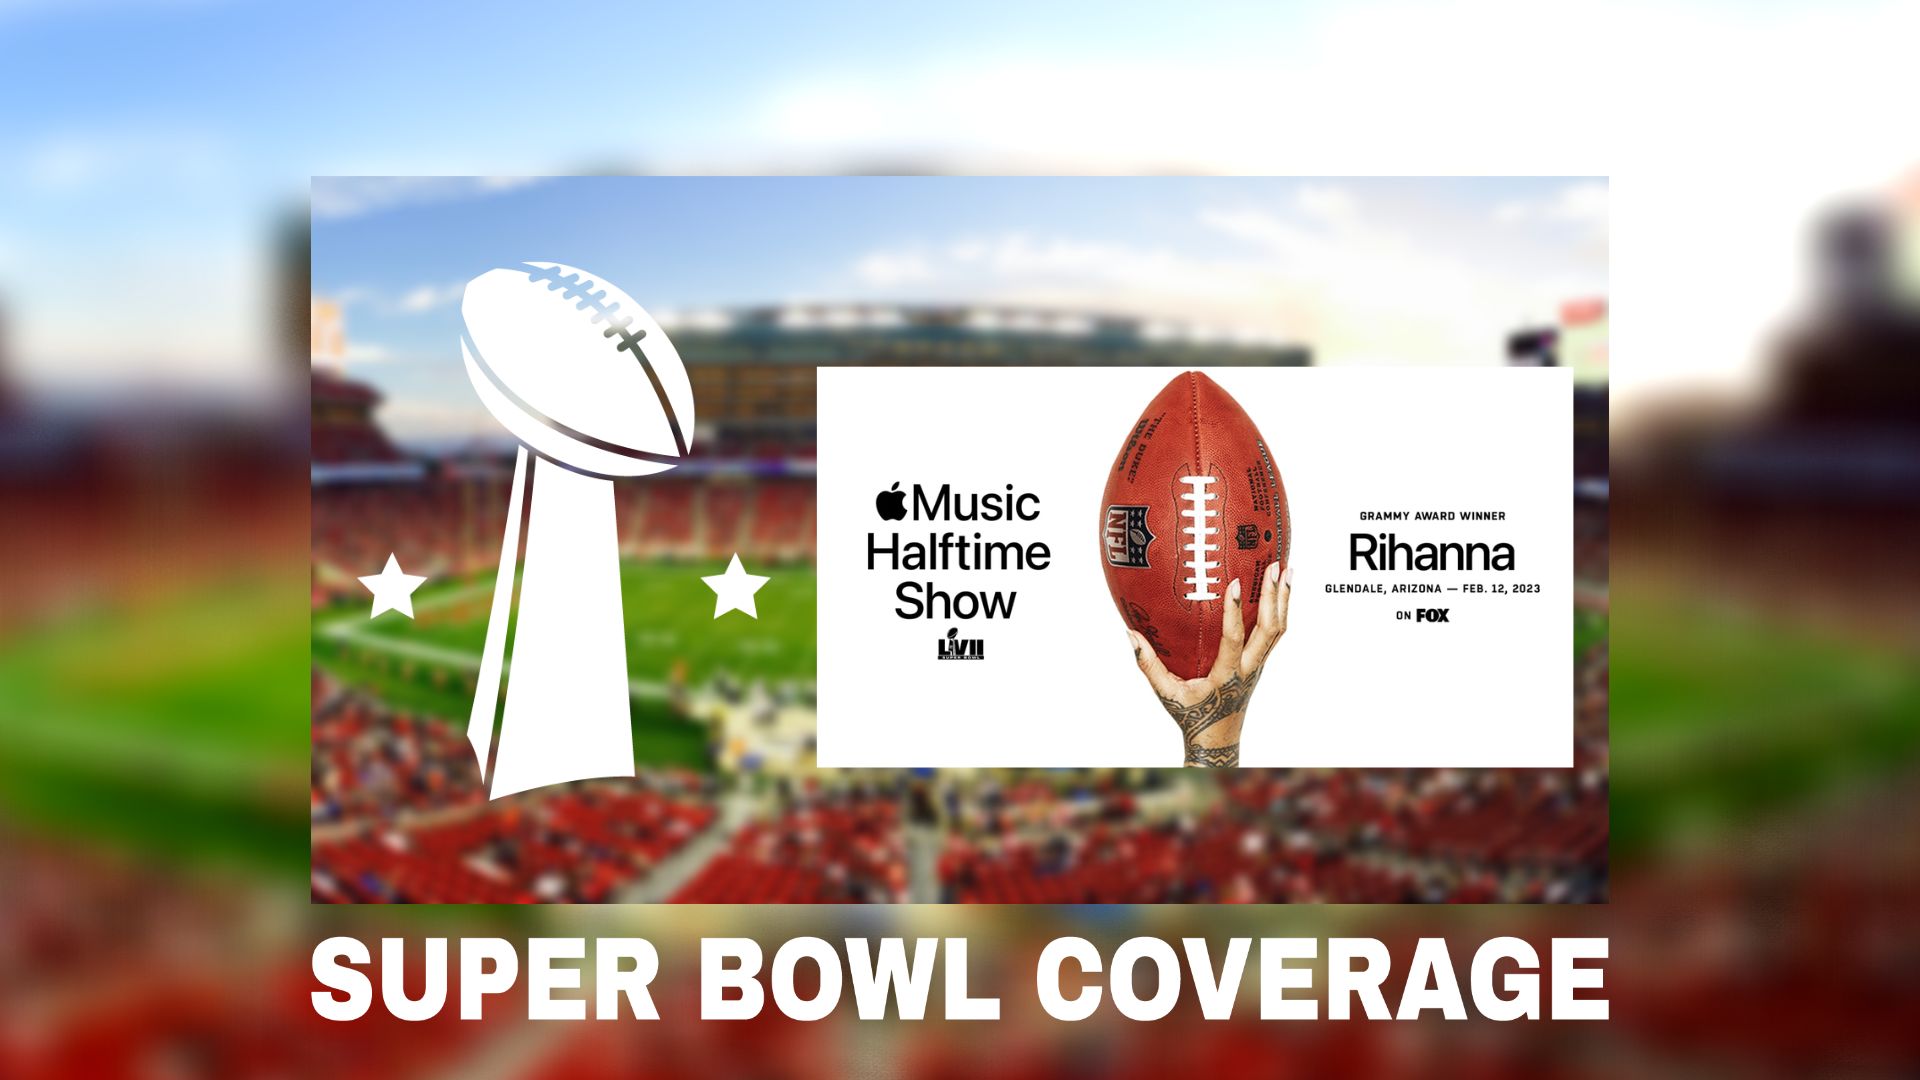 How to Watch Super Bowl 2023 Halftime Show